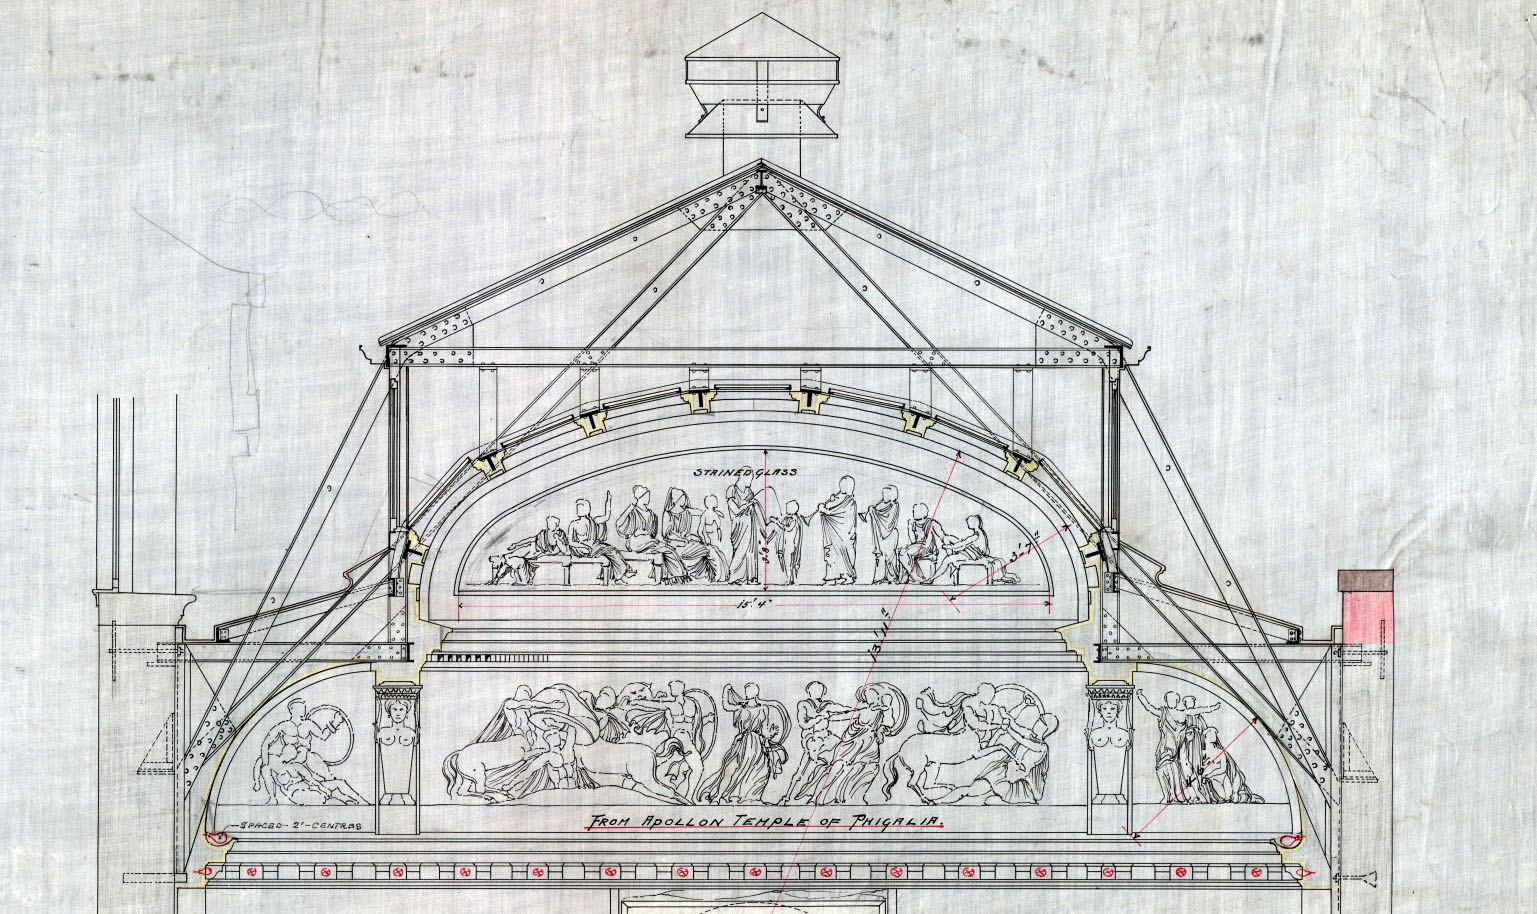 Architectural drawing by Alfred Zucker; "From Apollon Temple of Phigalia" is printed at the bottom of the drawing